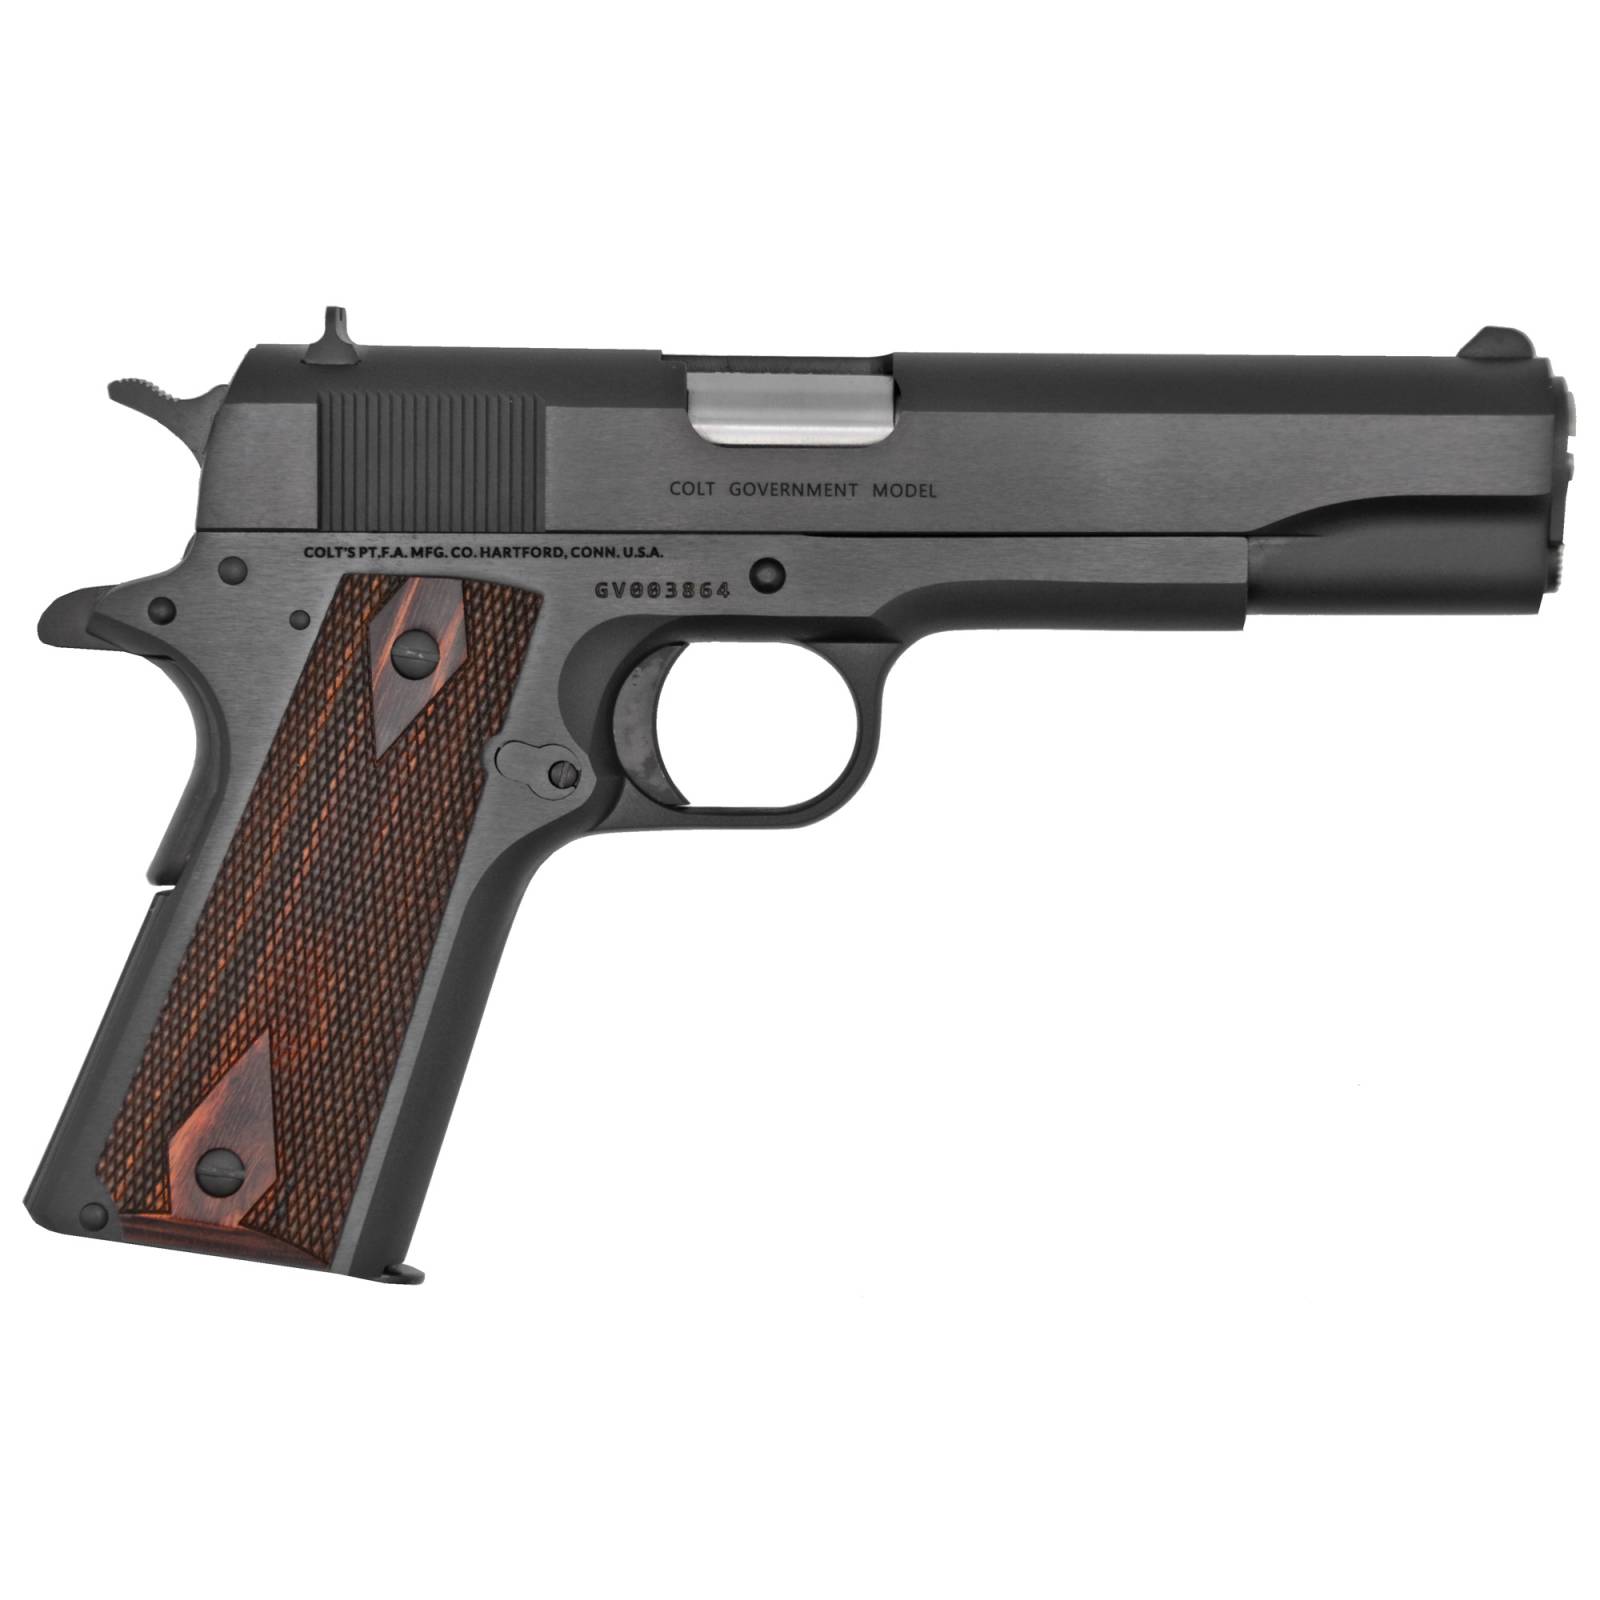 Colt 1911 Government Series 70 .45 ACP 5in Barrel 8+1 Round Capacity